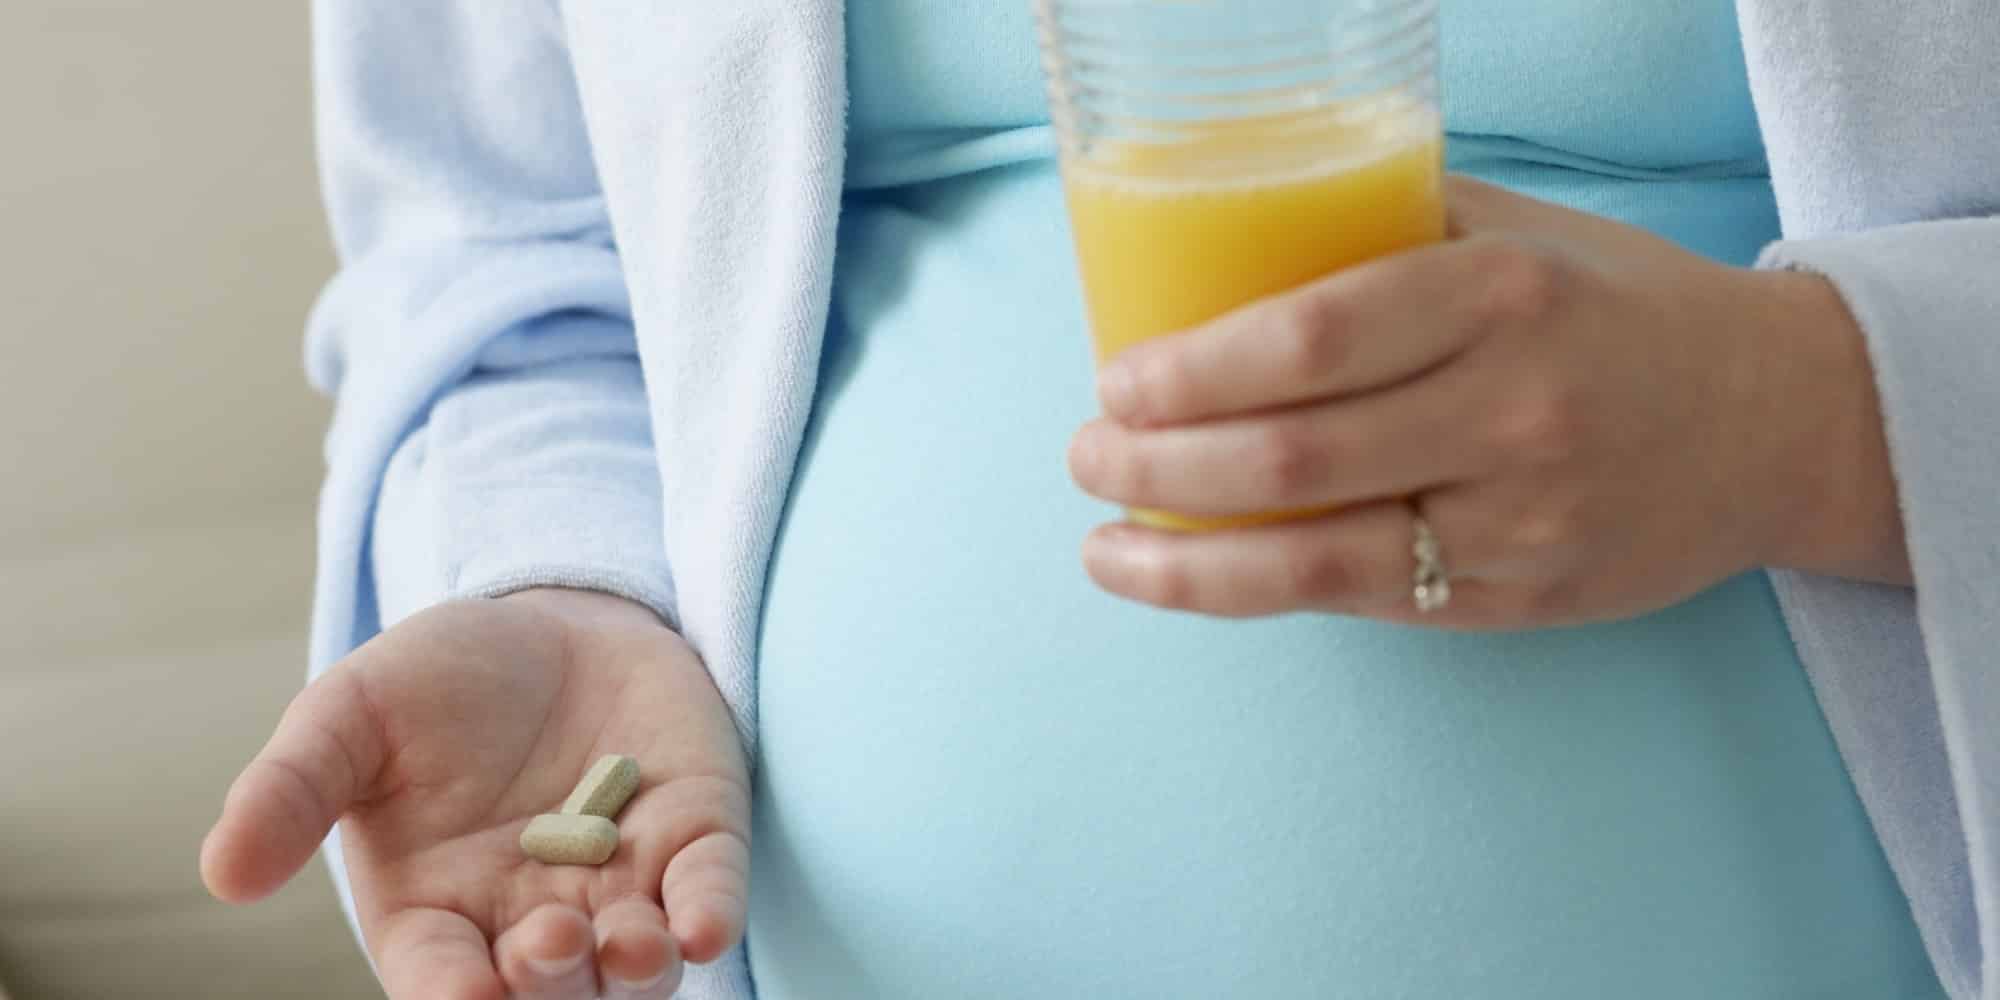 Taking Acetaminophen While Pregnant Linked To ADHD In Kids